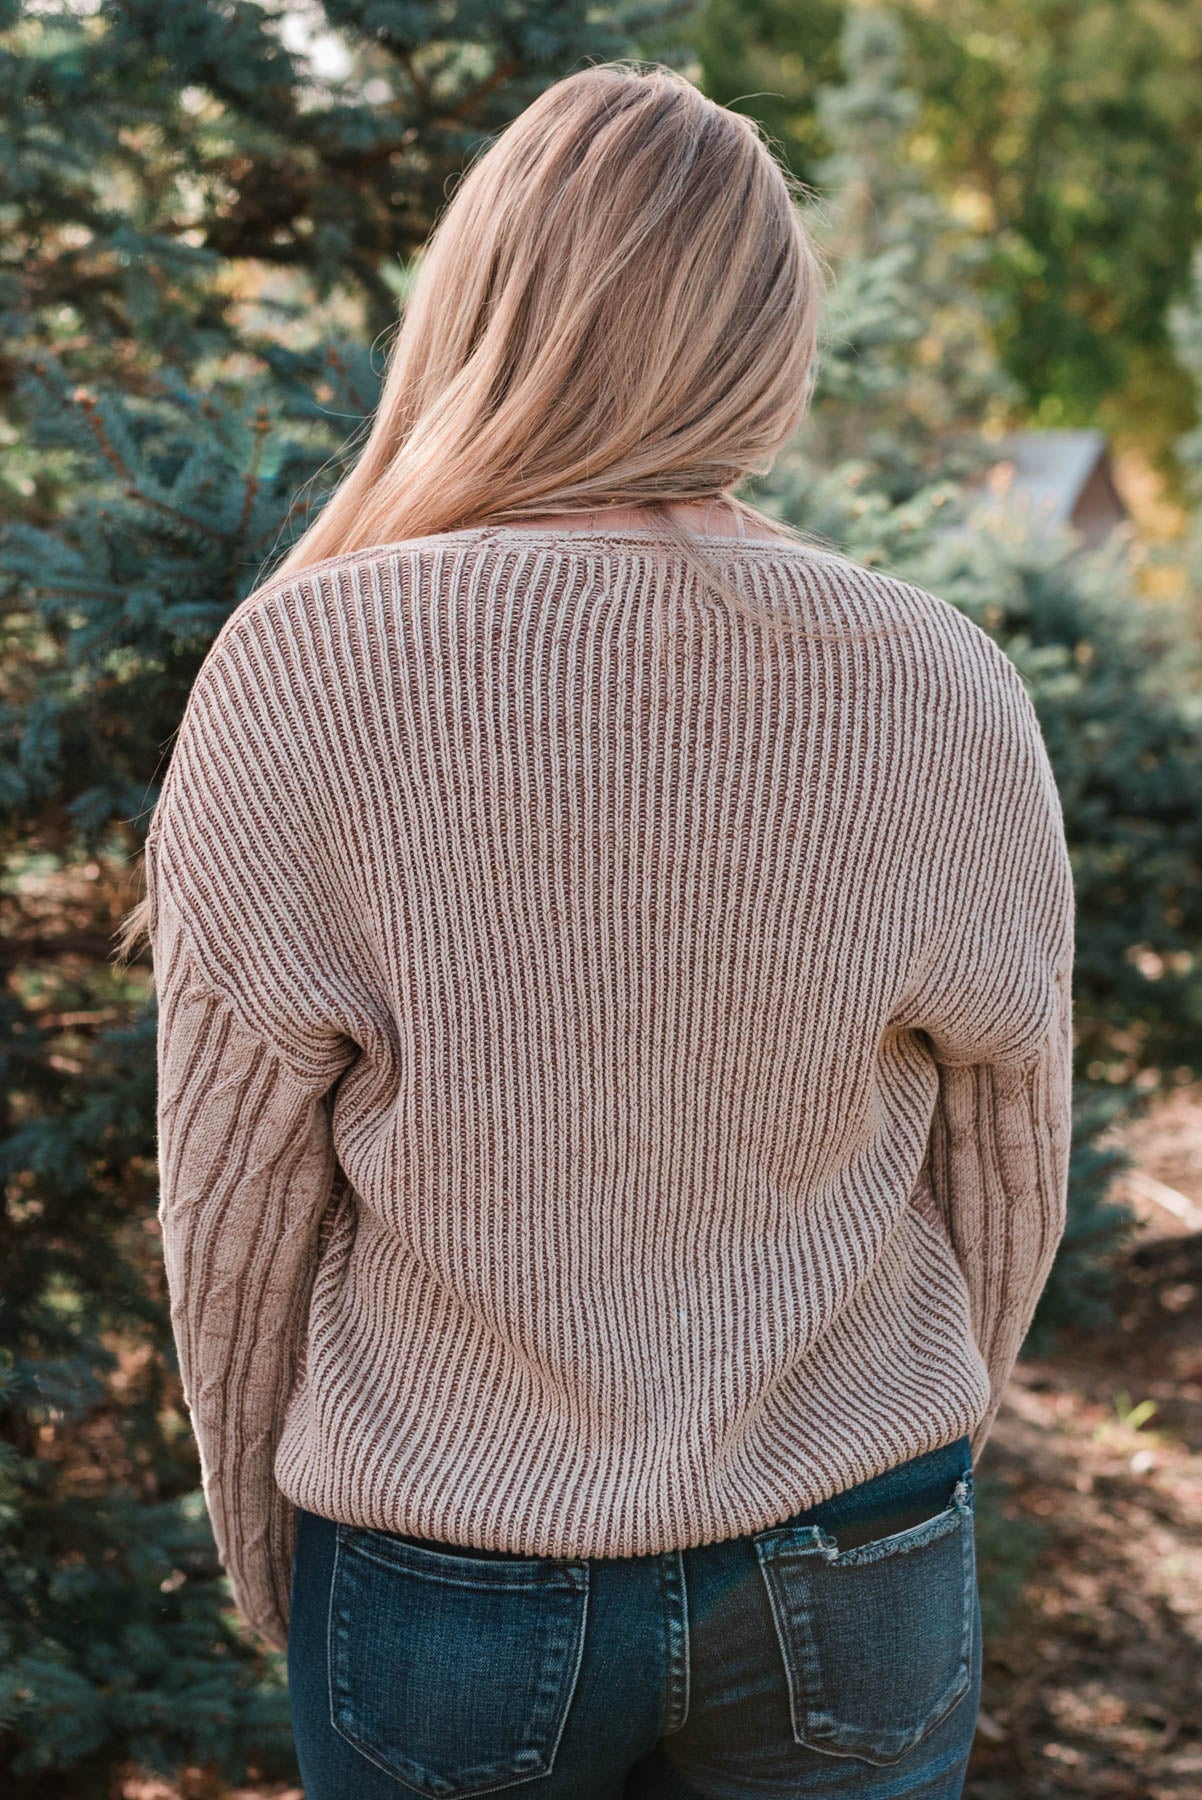 Back view of the taupe sweater